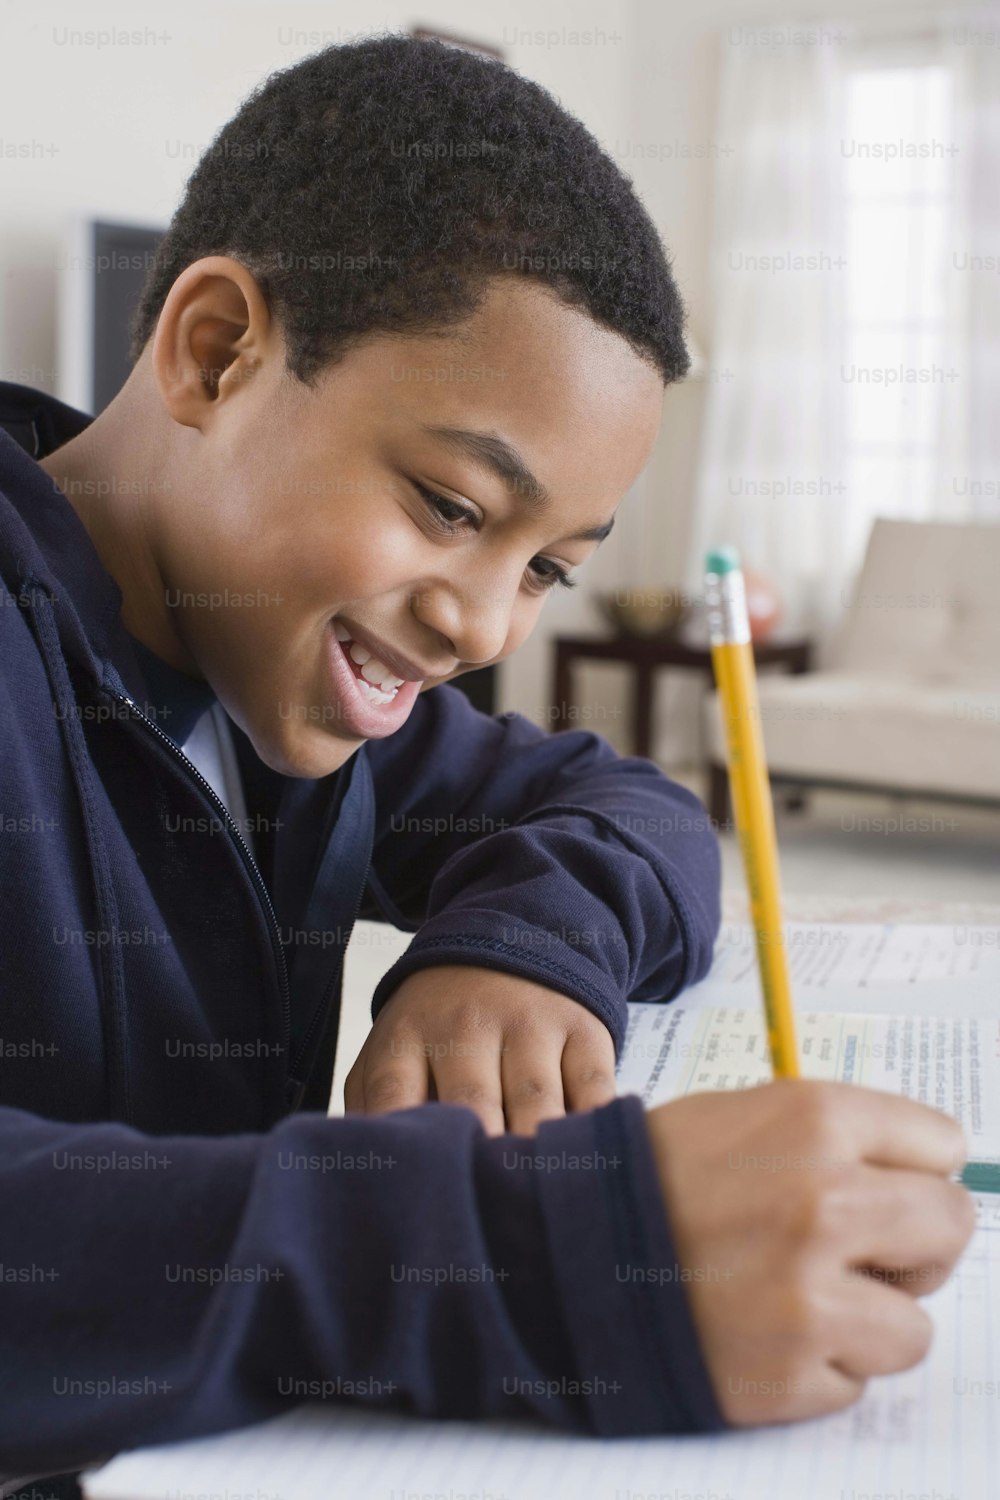 a young boy is smiling while writing on a piece of paper